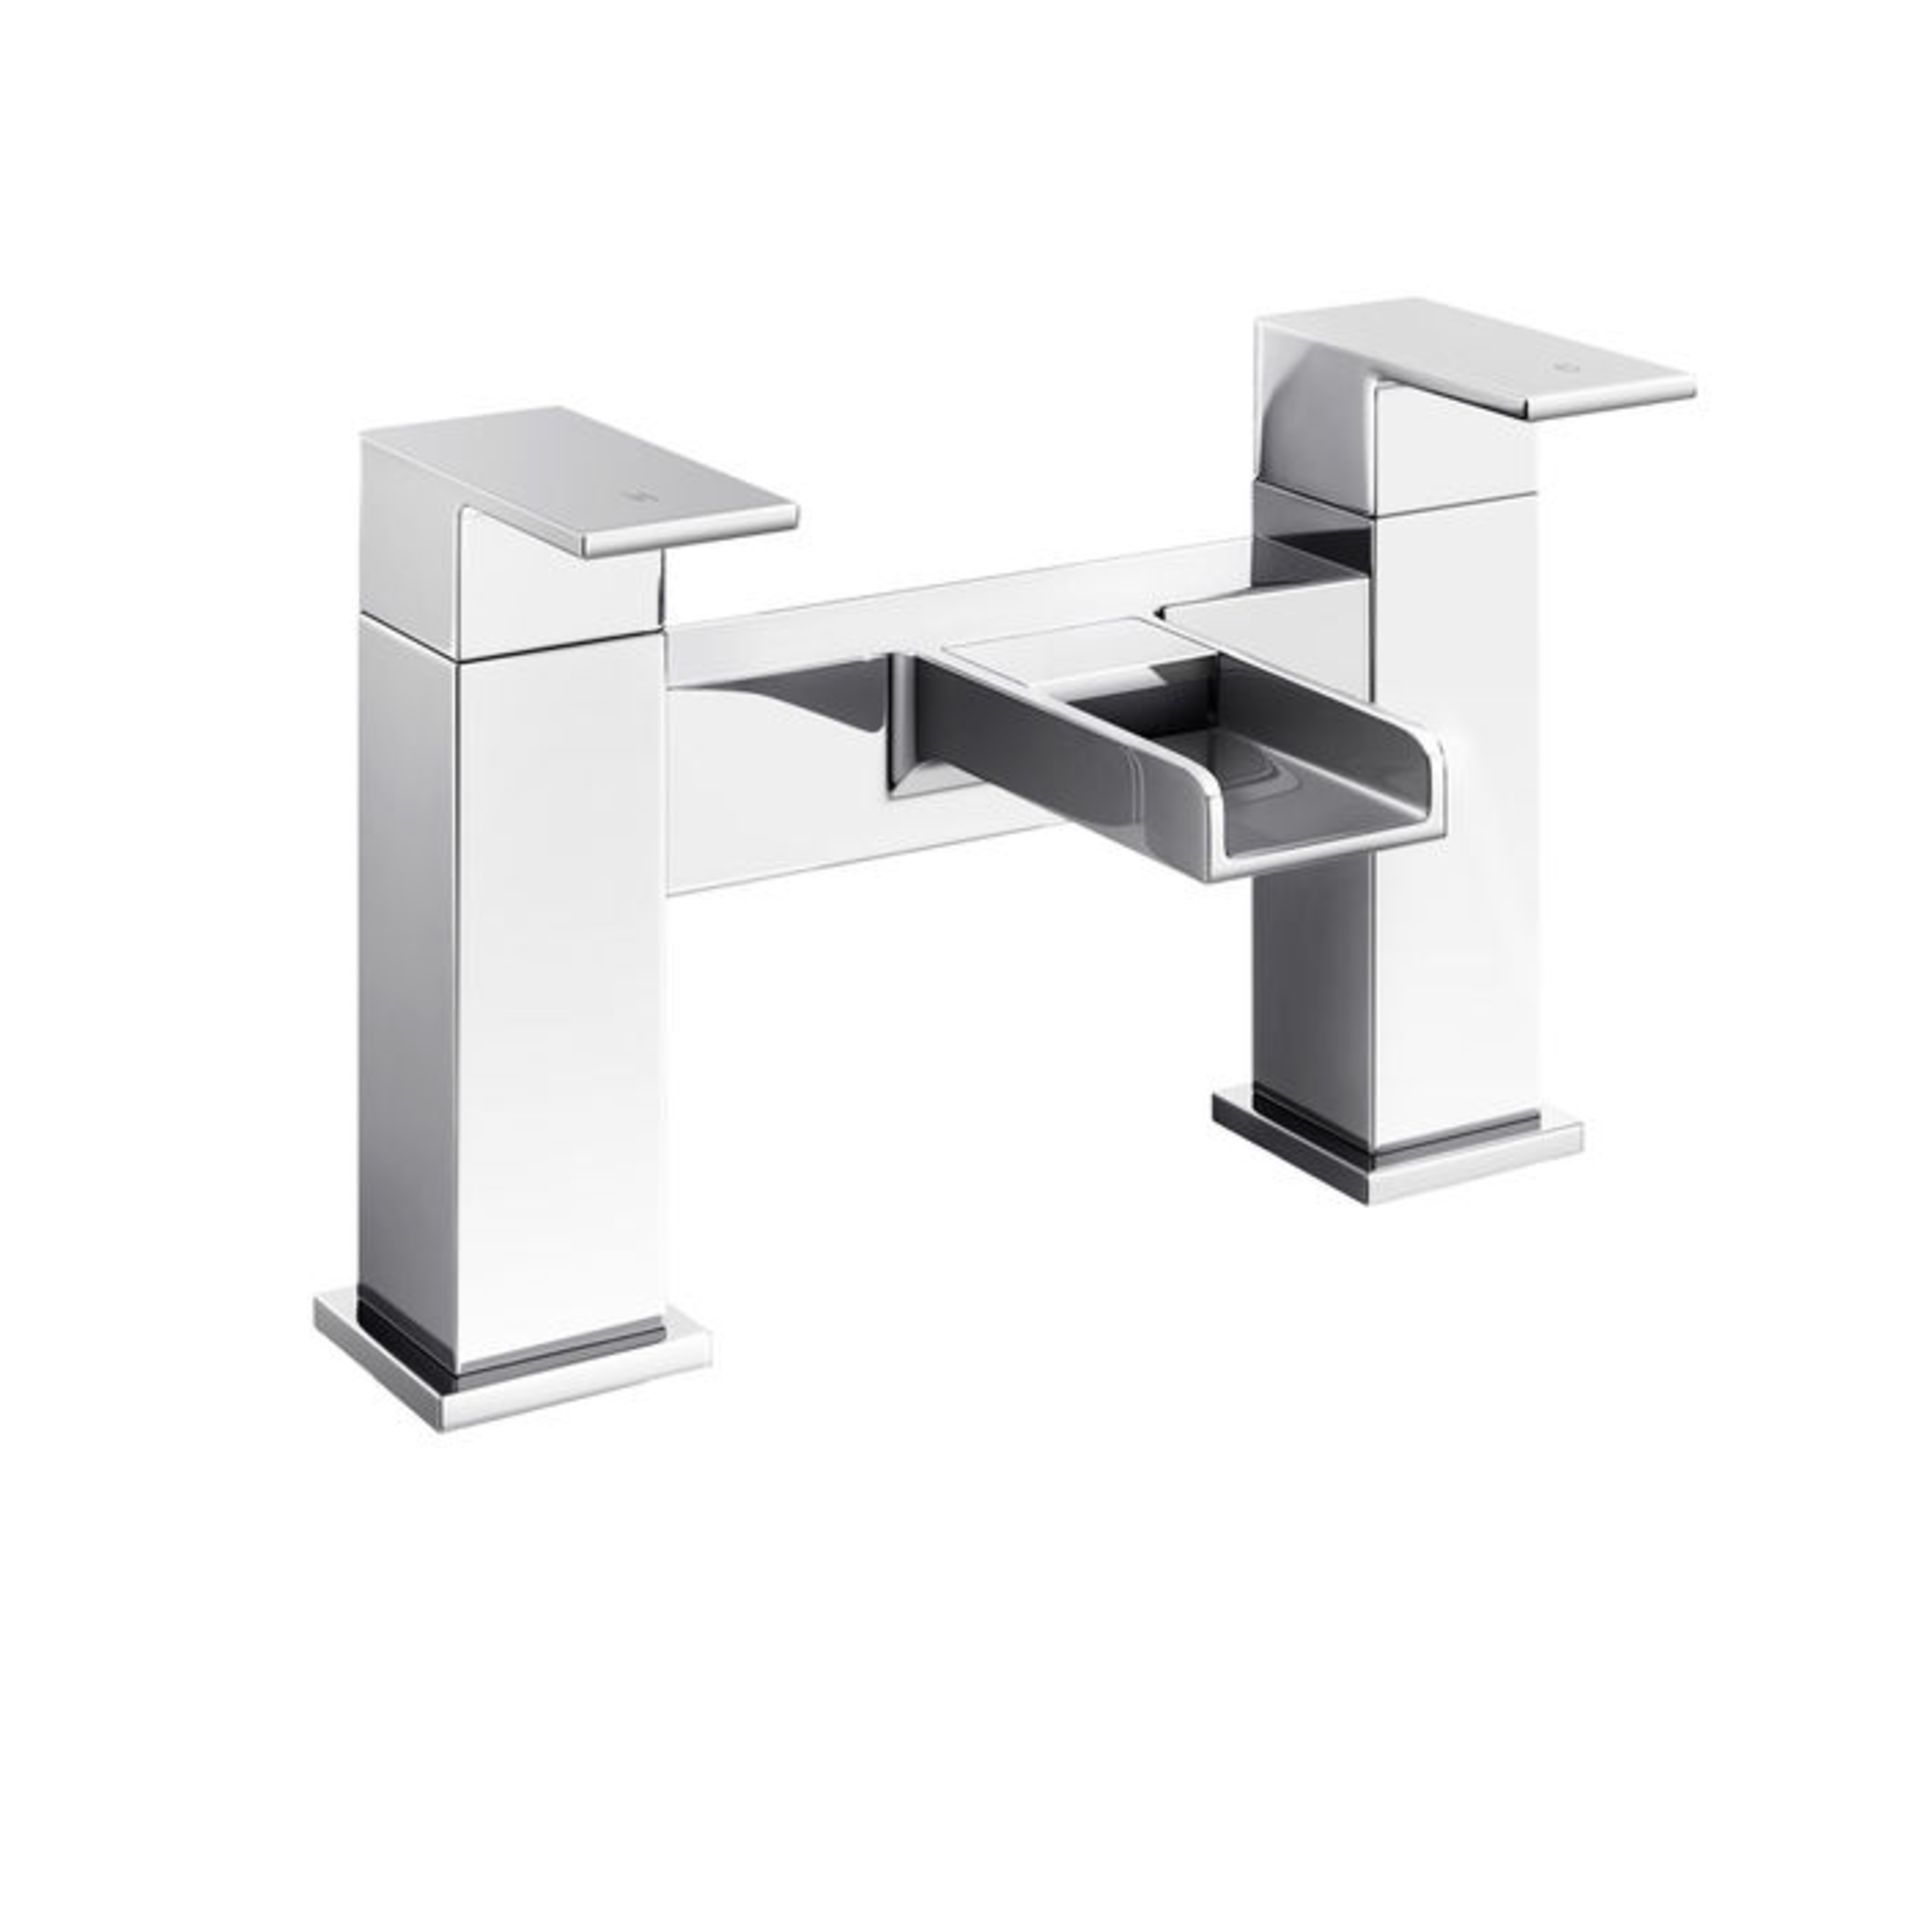 New & Boxed Niagra Waterfall Bath Mixer Taps. Tb3108.Chrome Plated Solid Brass 1/4 Turn Solid Brass - Image 2 of 2